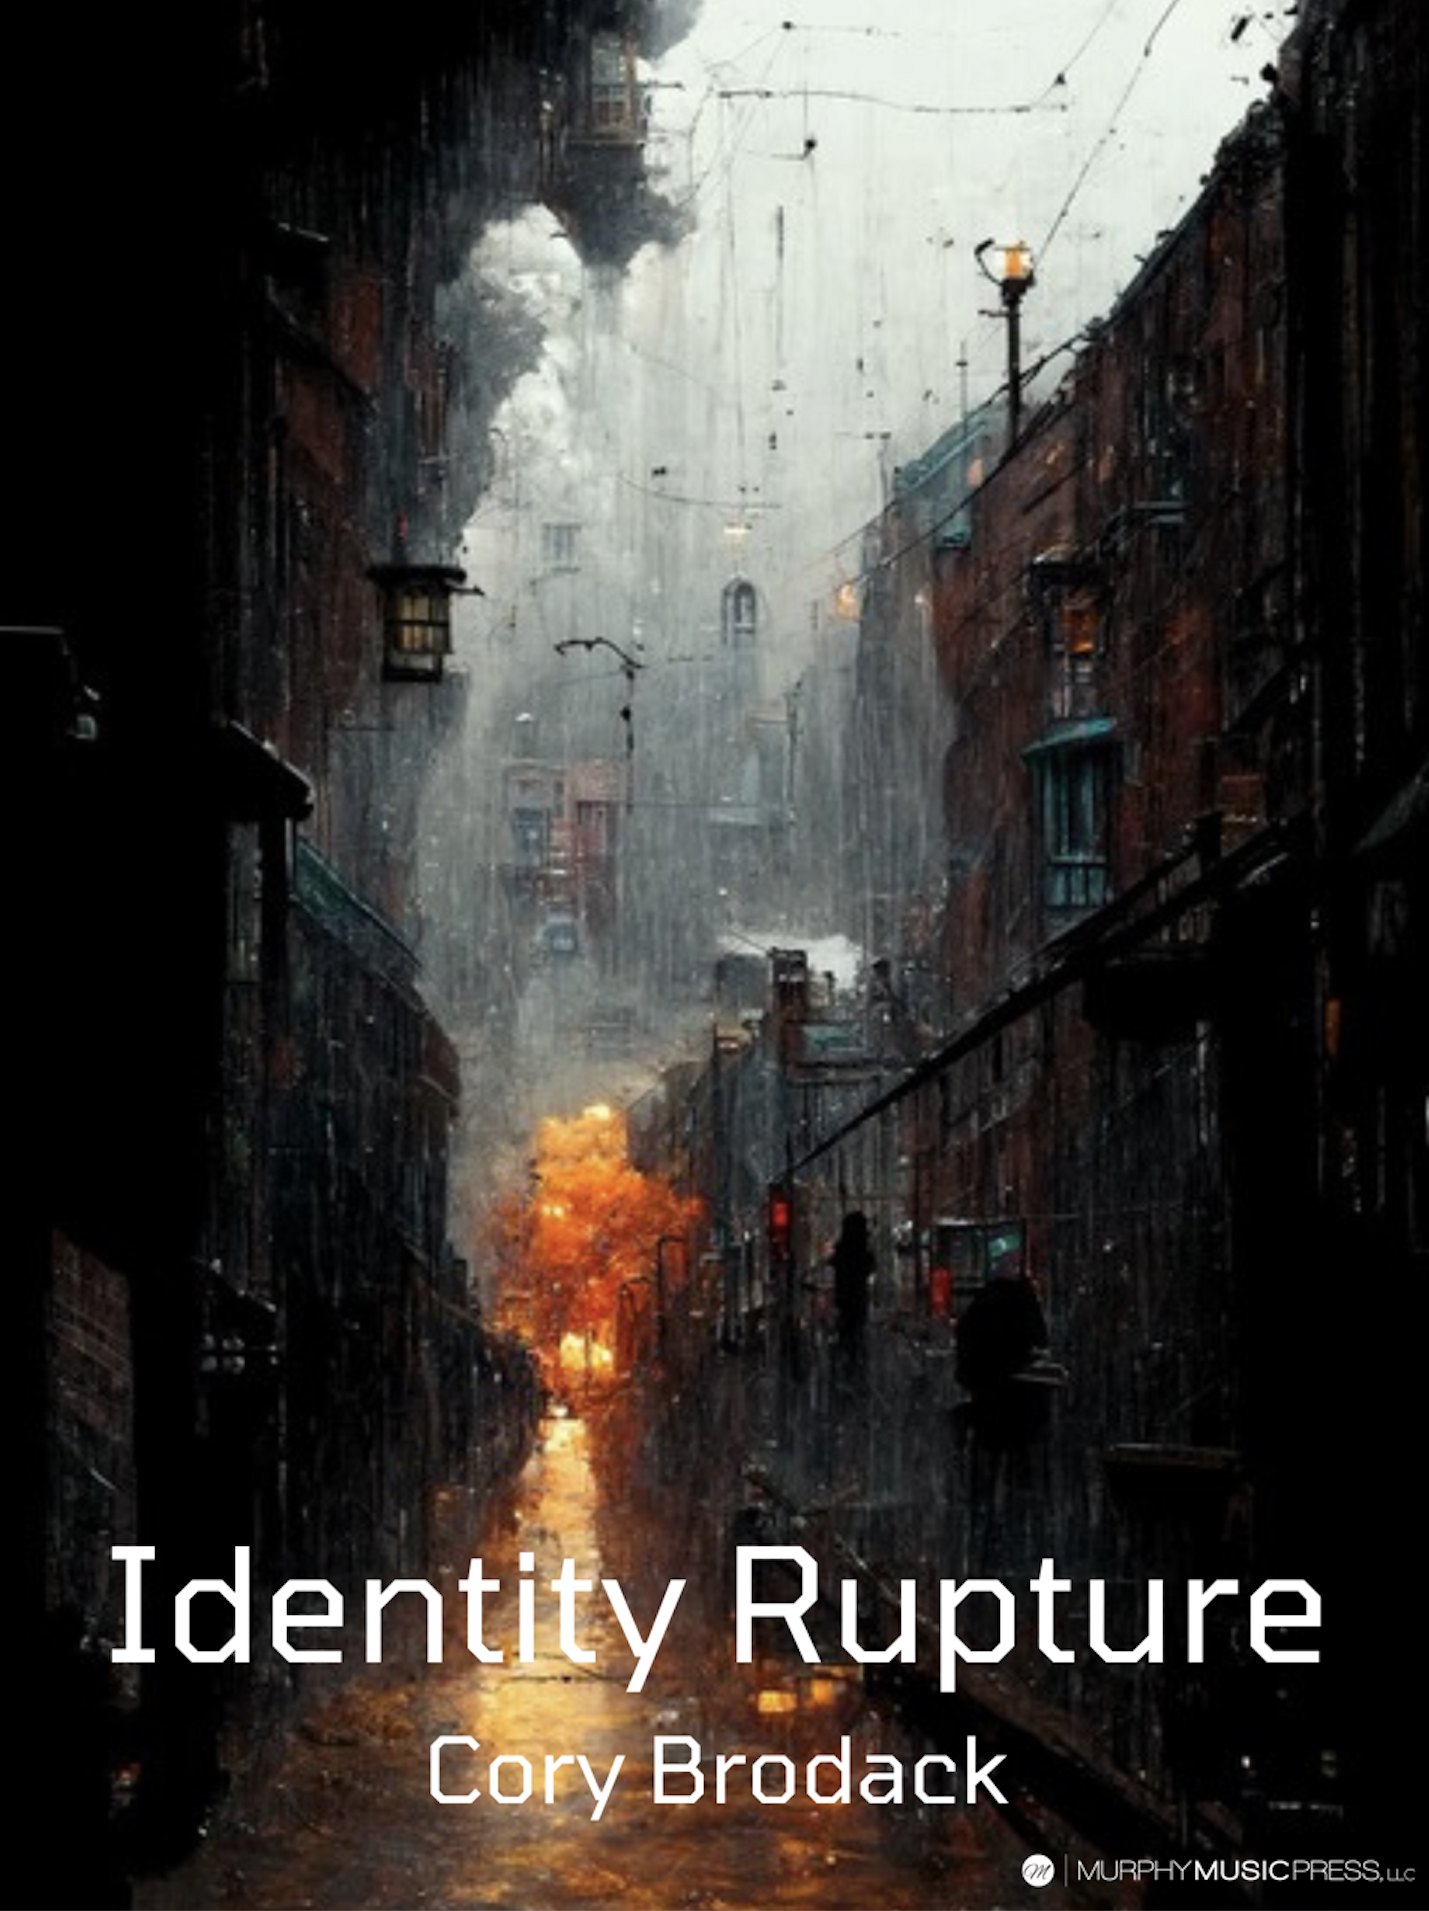 Identity Rupture by Cory Brodack